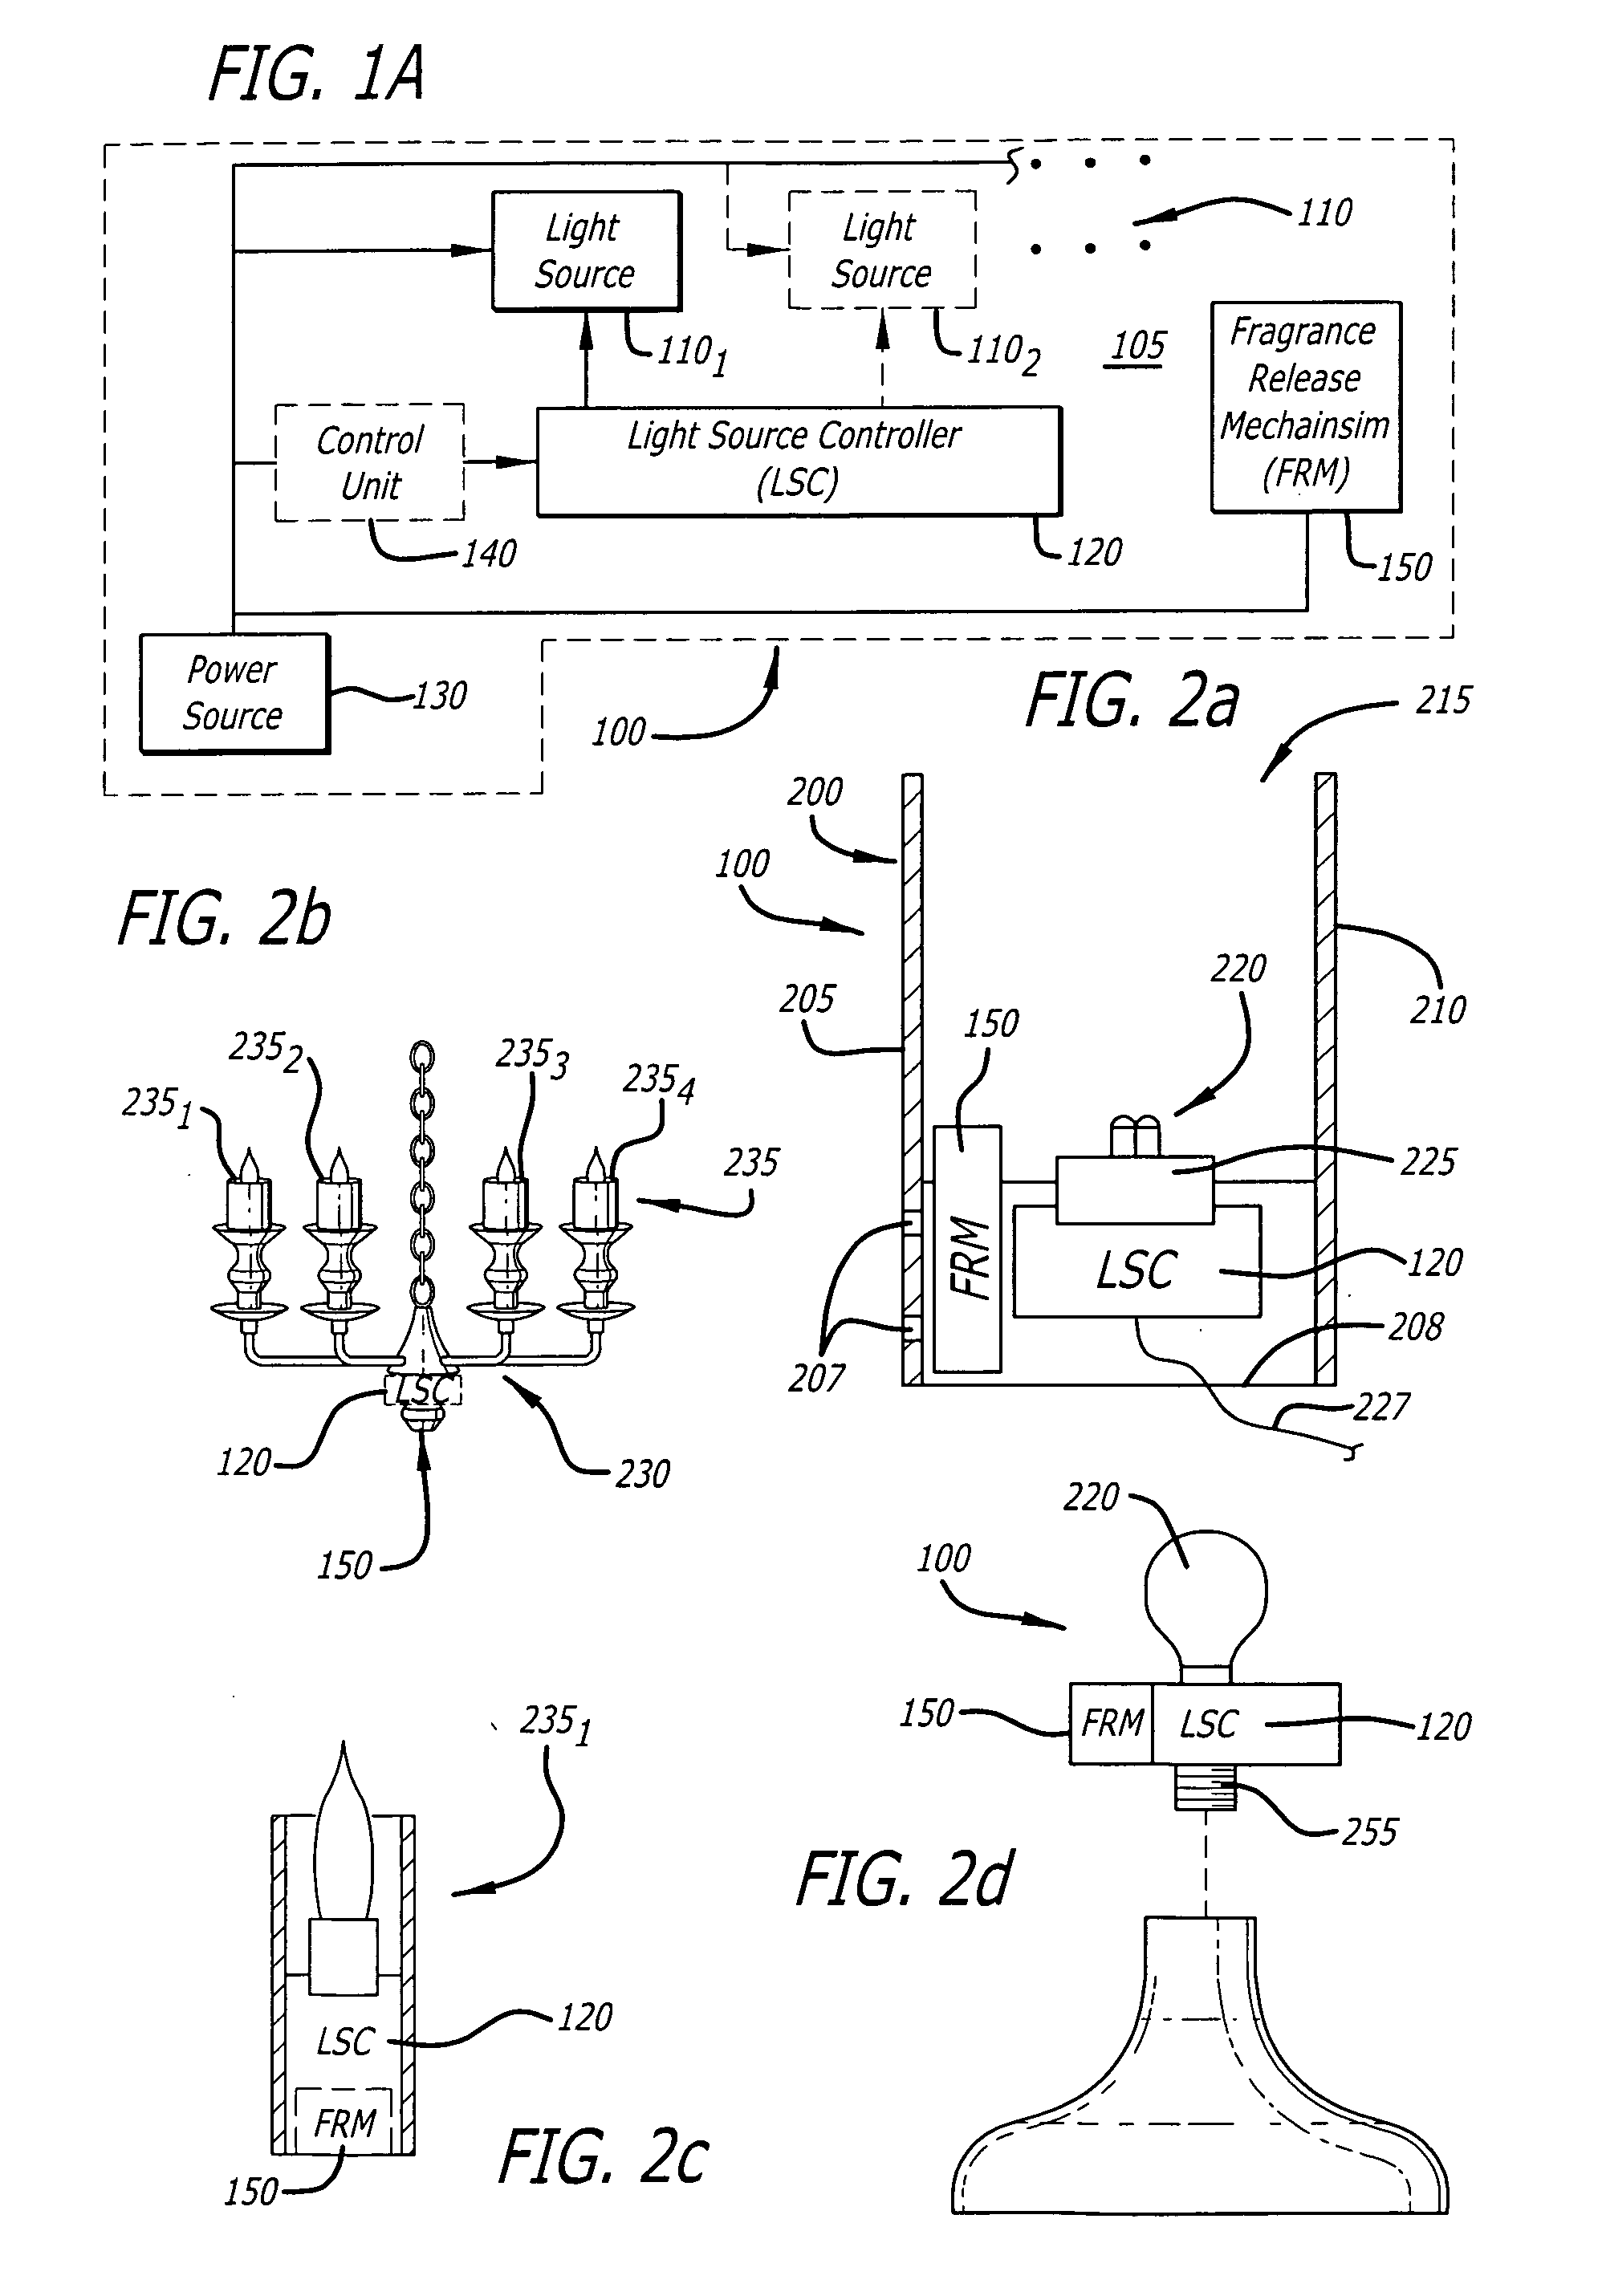 Candle emulation device with fragrance release mechanism